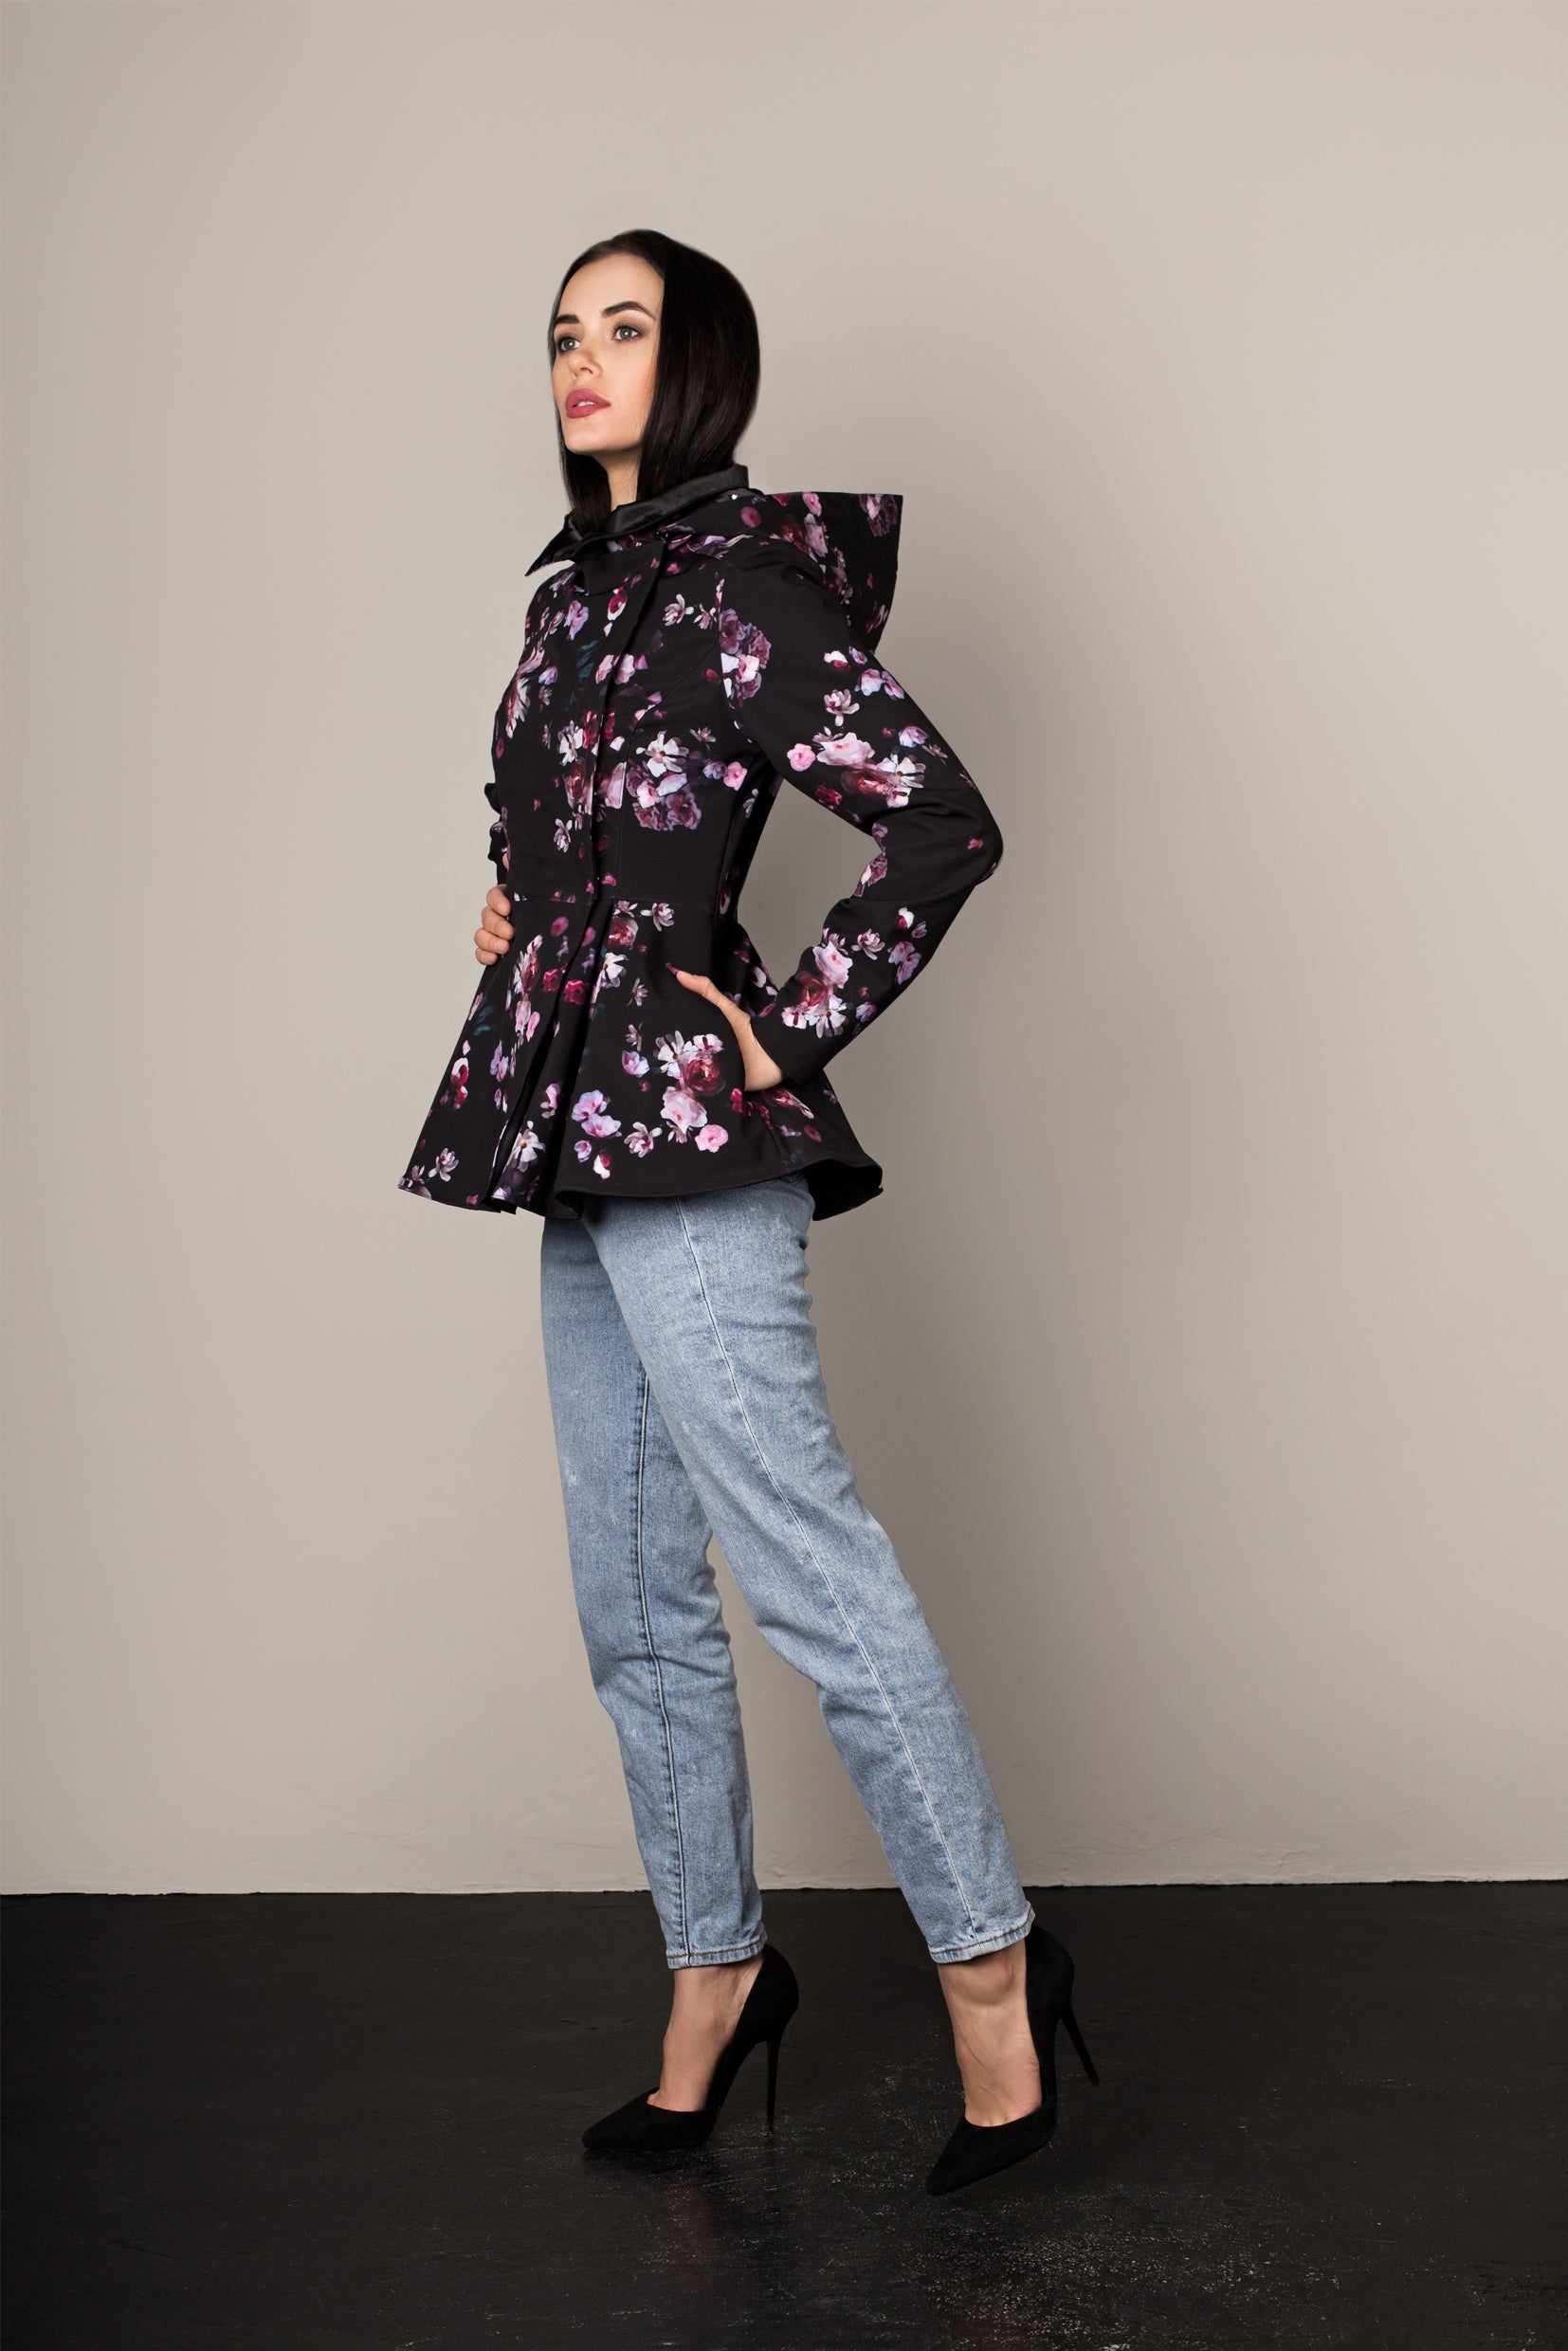 Women's Peplum Jacket with Detachable Hood and pink flower print on black background